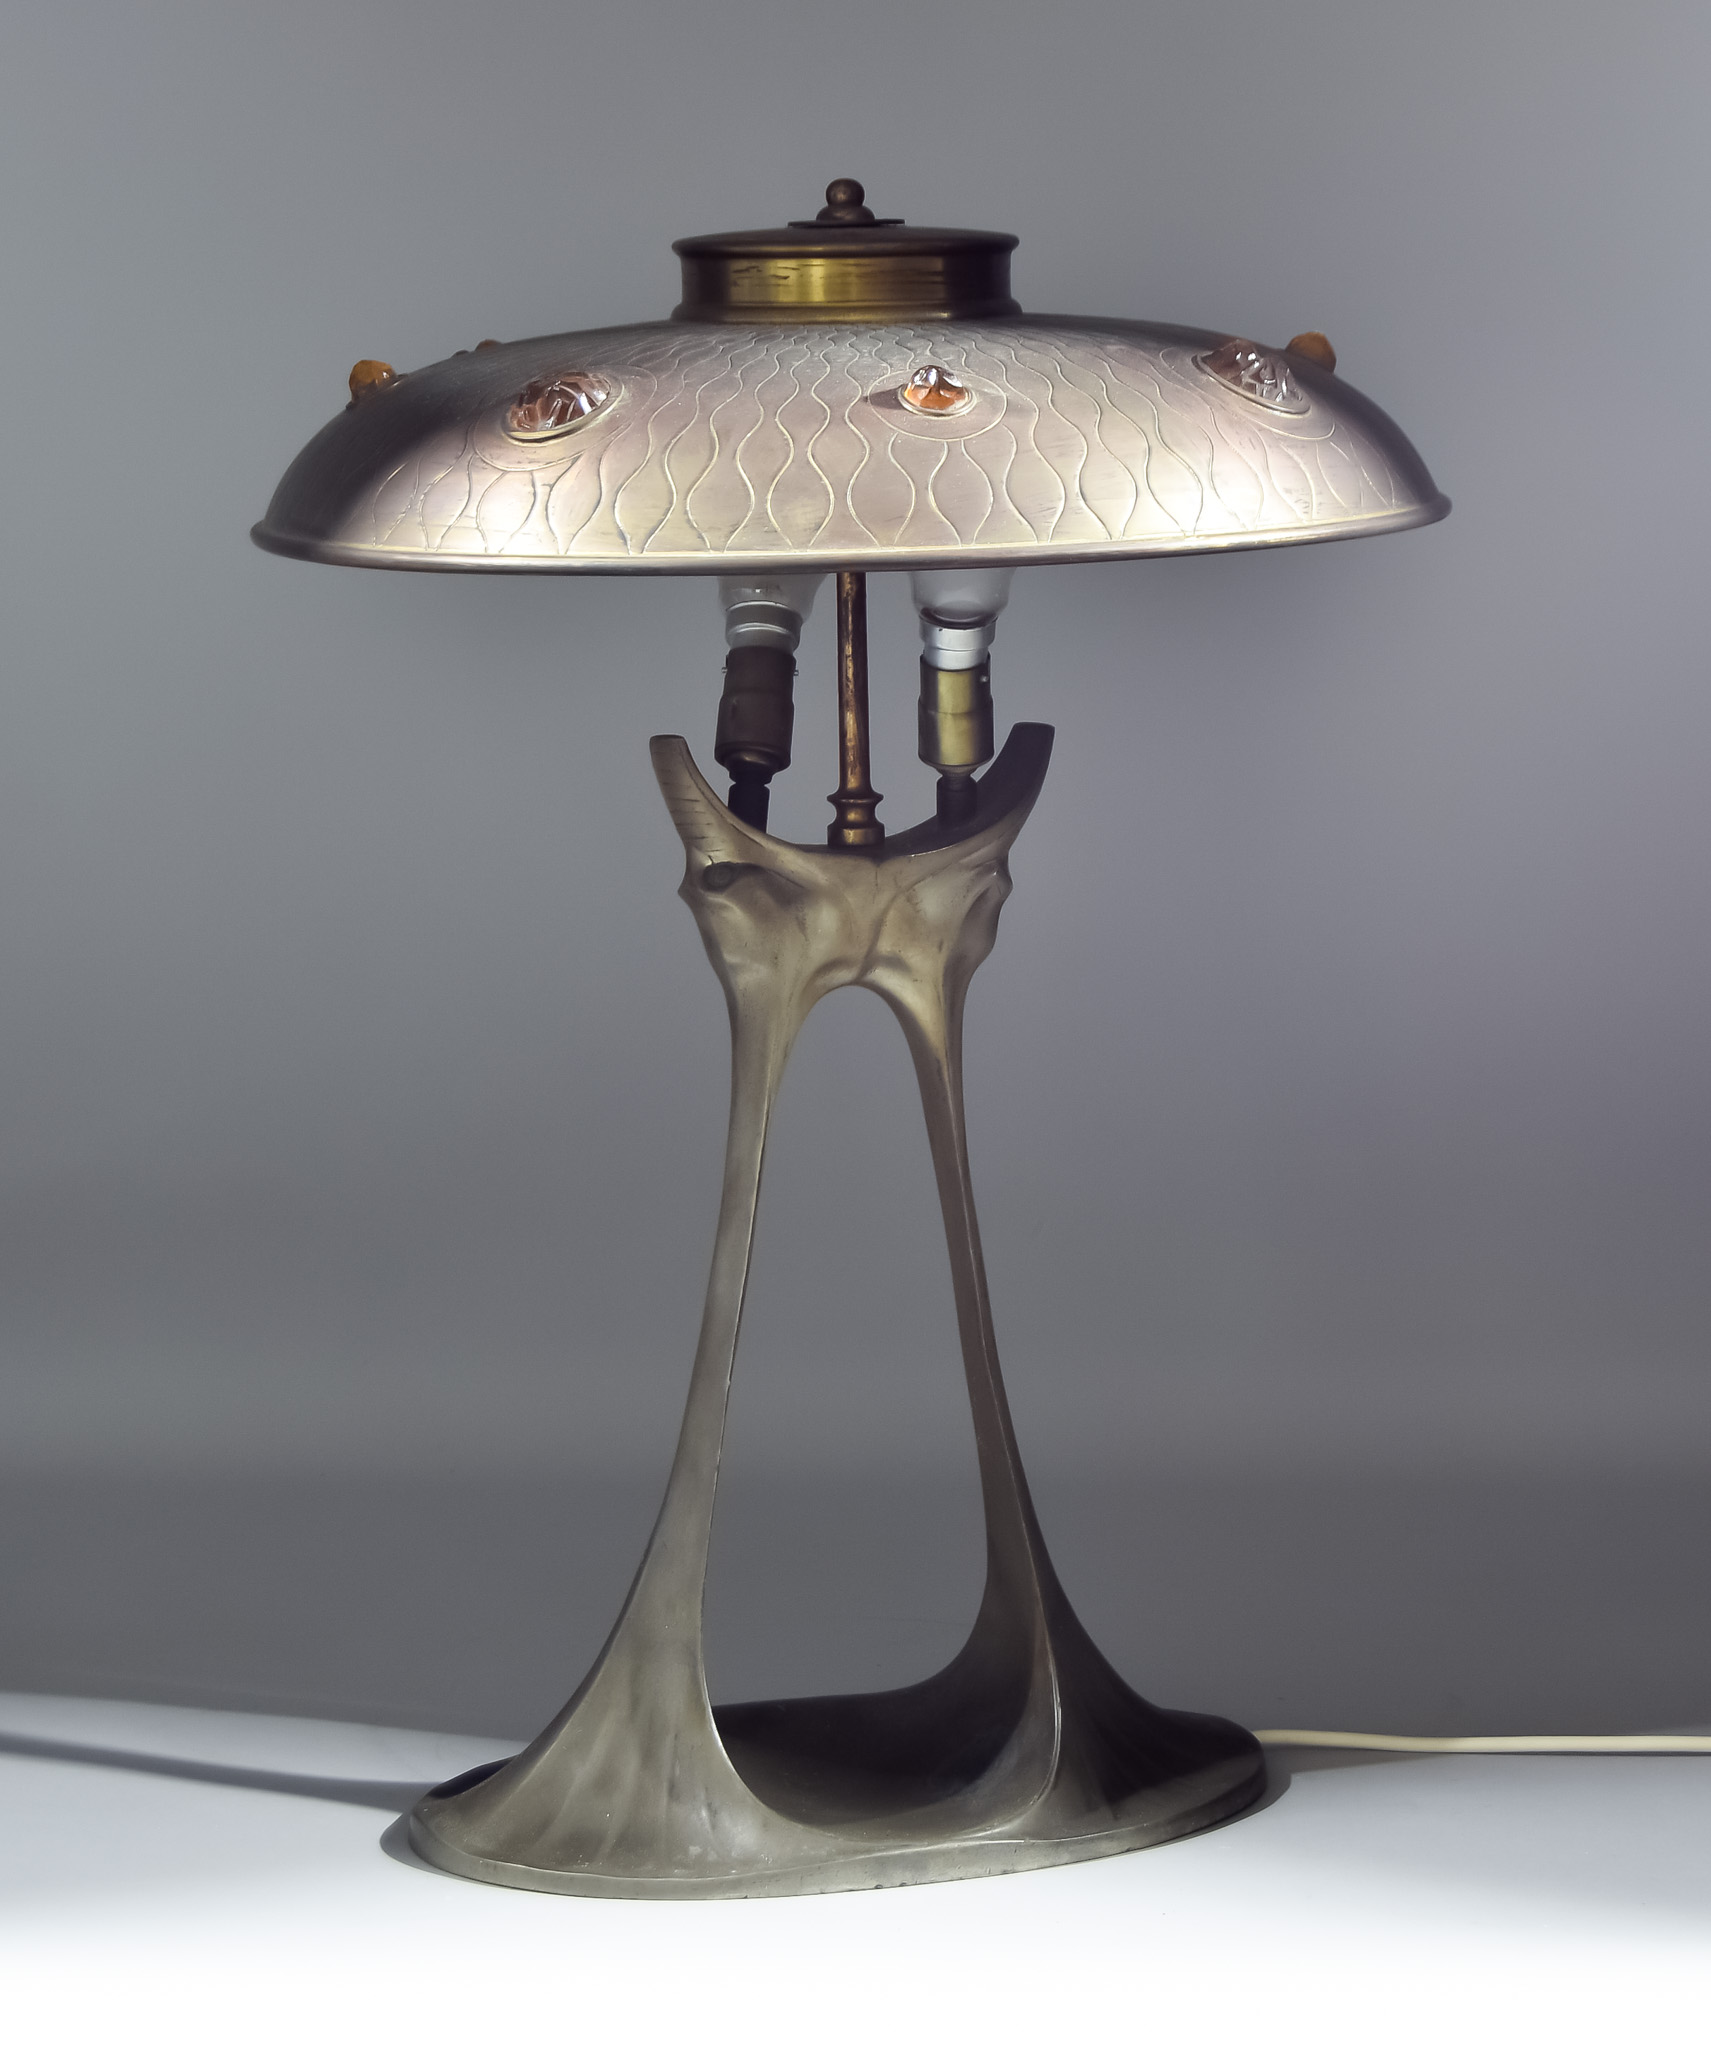 A Bronzed Pewter Table Lamp of Art Nouveau Design with pressed metal, bronzed circular shade, for